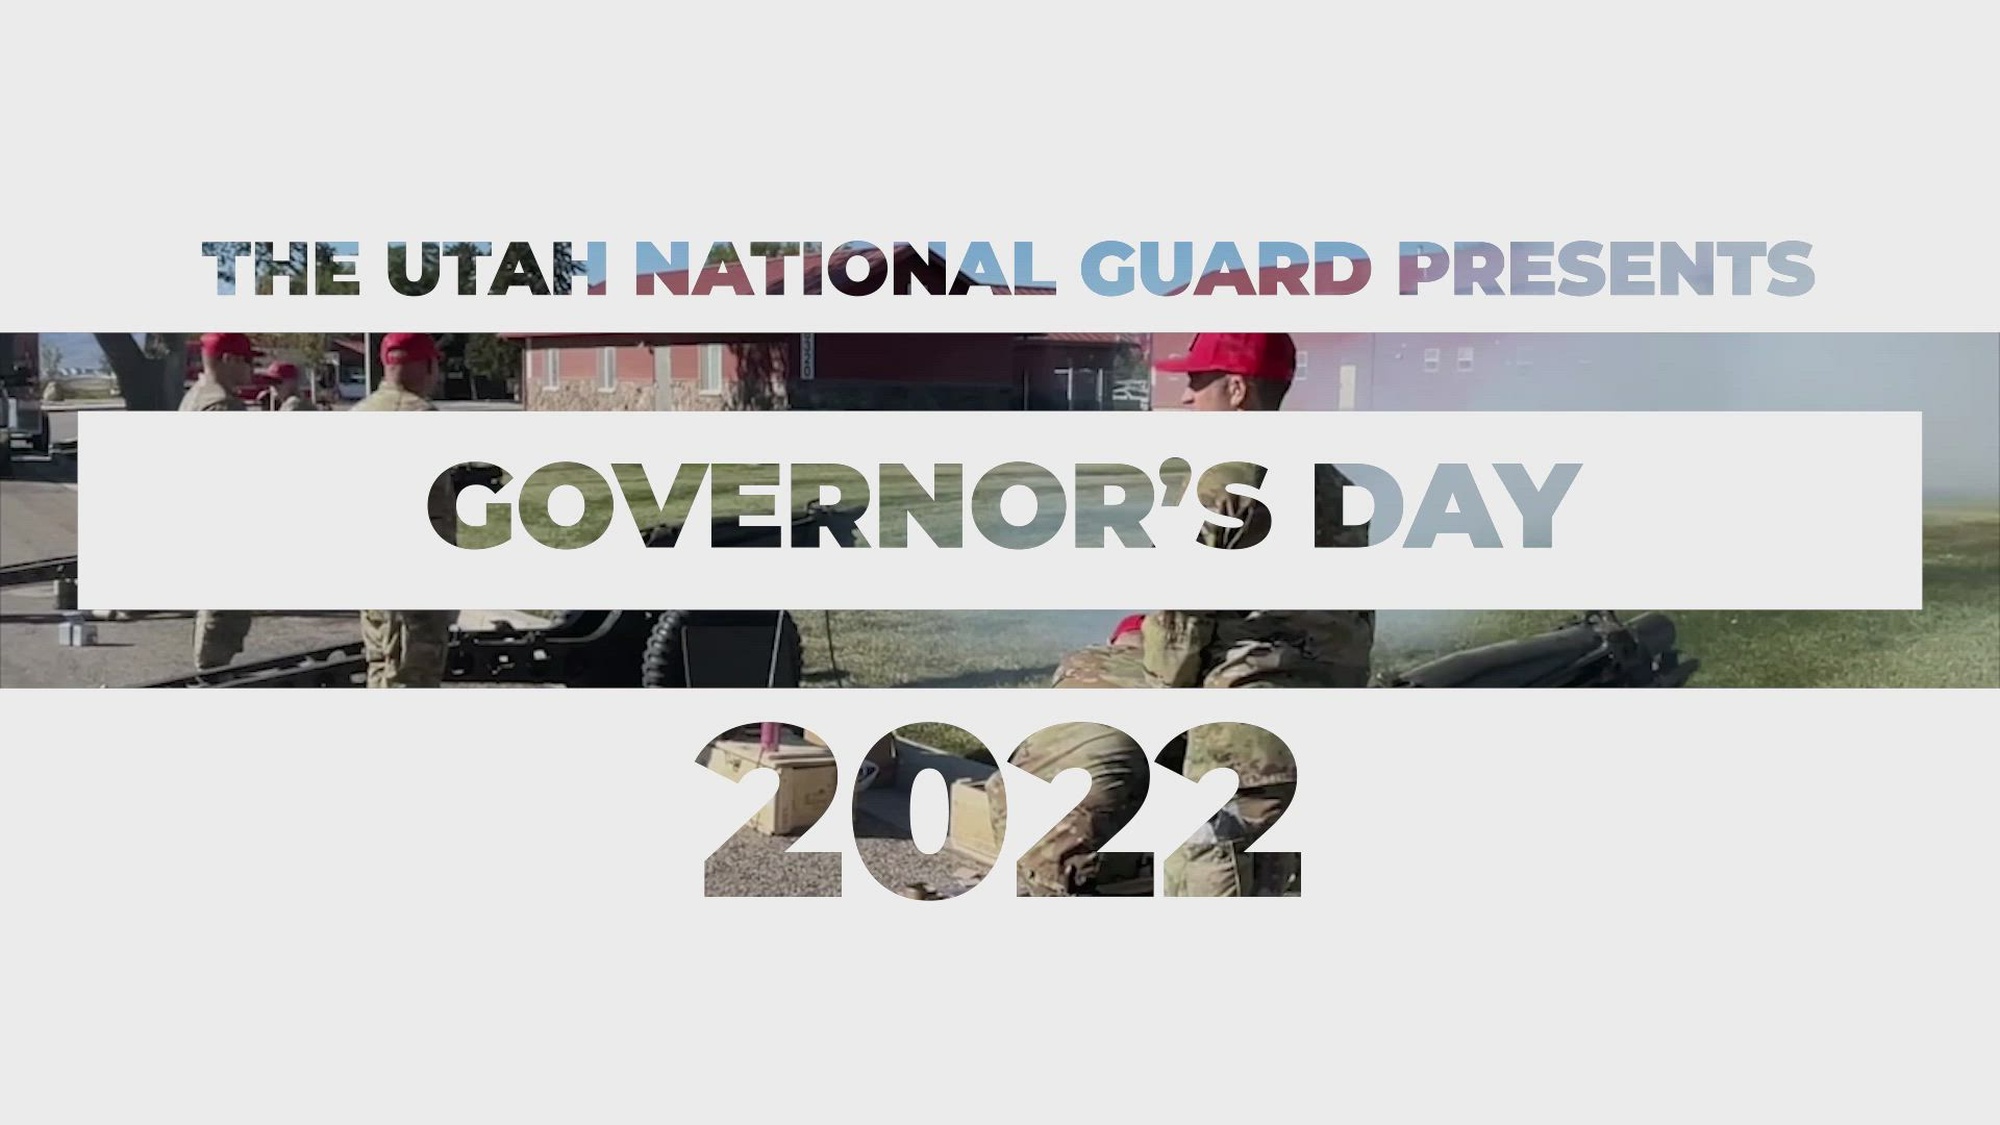 The Utah National Guard hosts the 67th Annual Governor’s Day at Camp Williams, Utah, Sept. 24, 2022. Governor’s Day is a time-honored tradition that has been celebrated since 1954, excepting the past two years due to the COVID-19 pandemic. The event included a live pass in review ceremony, which allowed the Commander in Chief, Gov. Spencer J. Cox, and the Adjutant General, Maj. Gen. Michael J. Turley, Utah National Guard, a joint opportunity to inspect their troops. (U.S. Army National Guard video by Staff Sgt. Jordan Hack)